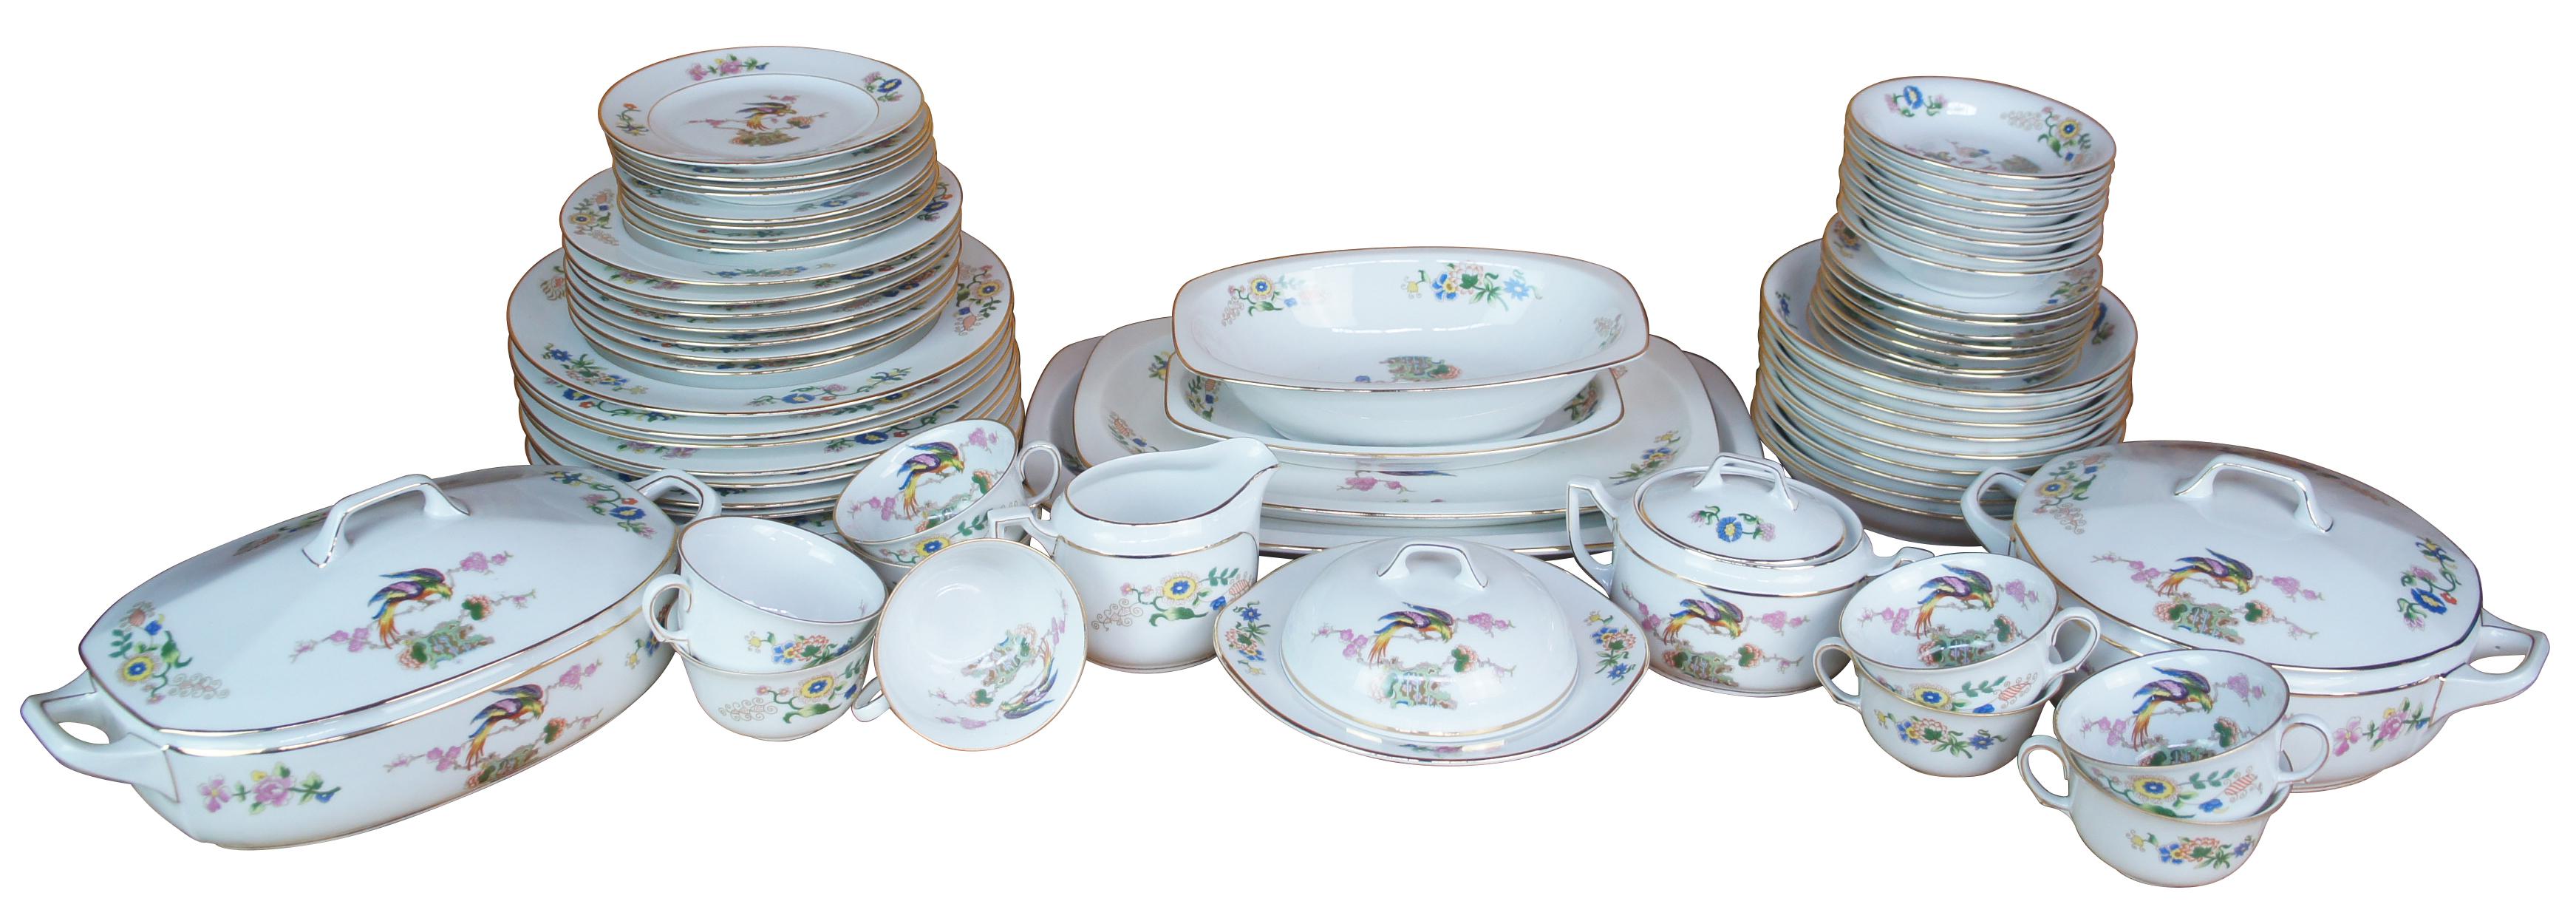 Vintage 6720 by Epiag dinnerware set, circa last quarter of 20th century. Beautifully designed with a bird at the center and floral rim. 

Measures: 9 dinner 10in, 7 salad 8in, 8 bread 6.25in, 8 saucers 5.5in, 8 small bowl 5.25 x1, large platter,